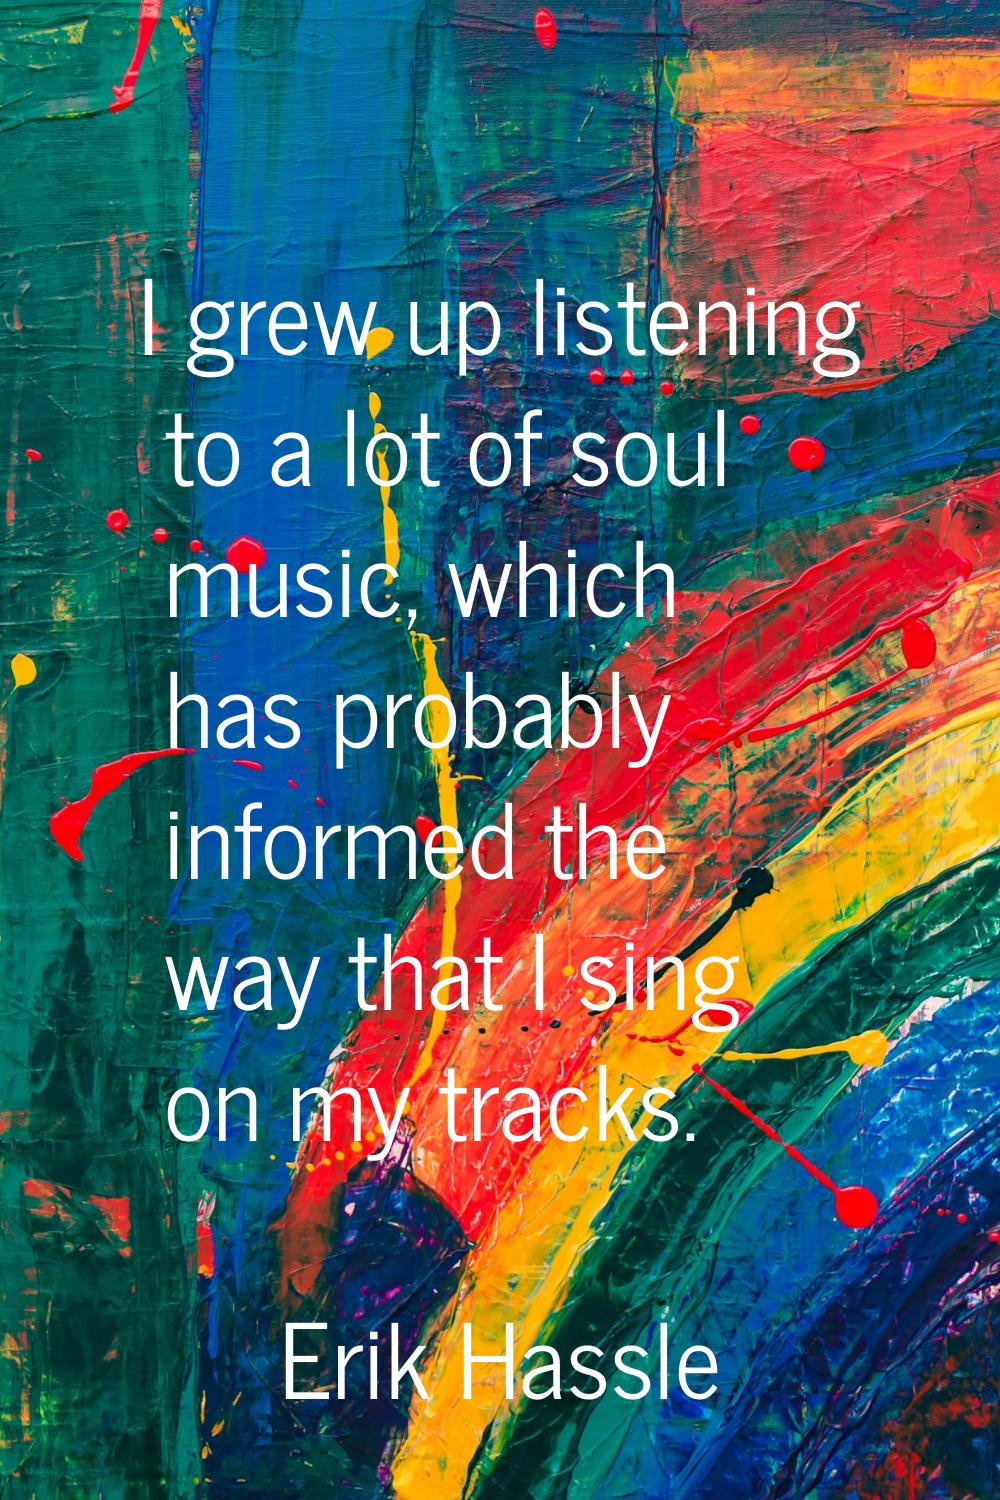 I grew up listening to a lot of soul music, which has probably informed the way that I sing on my t